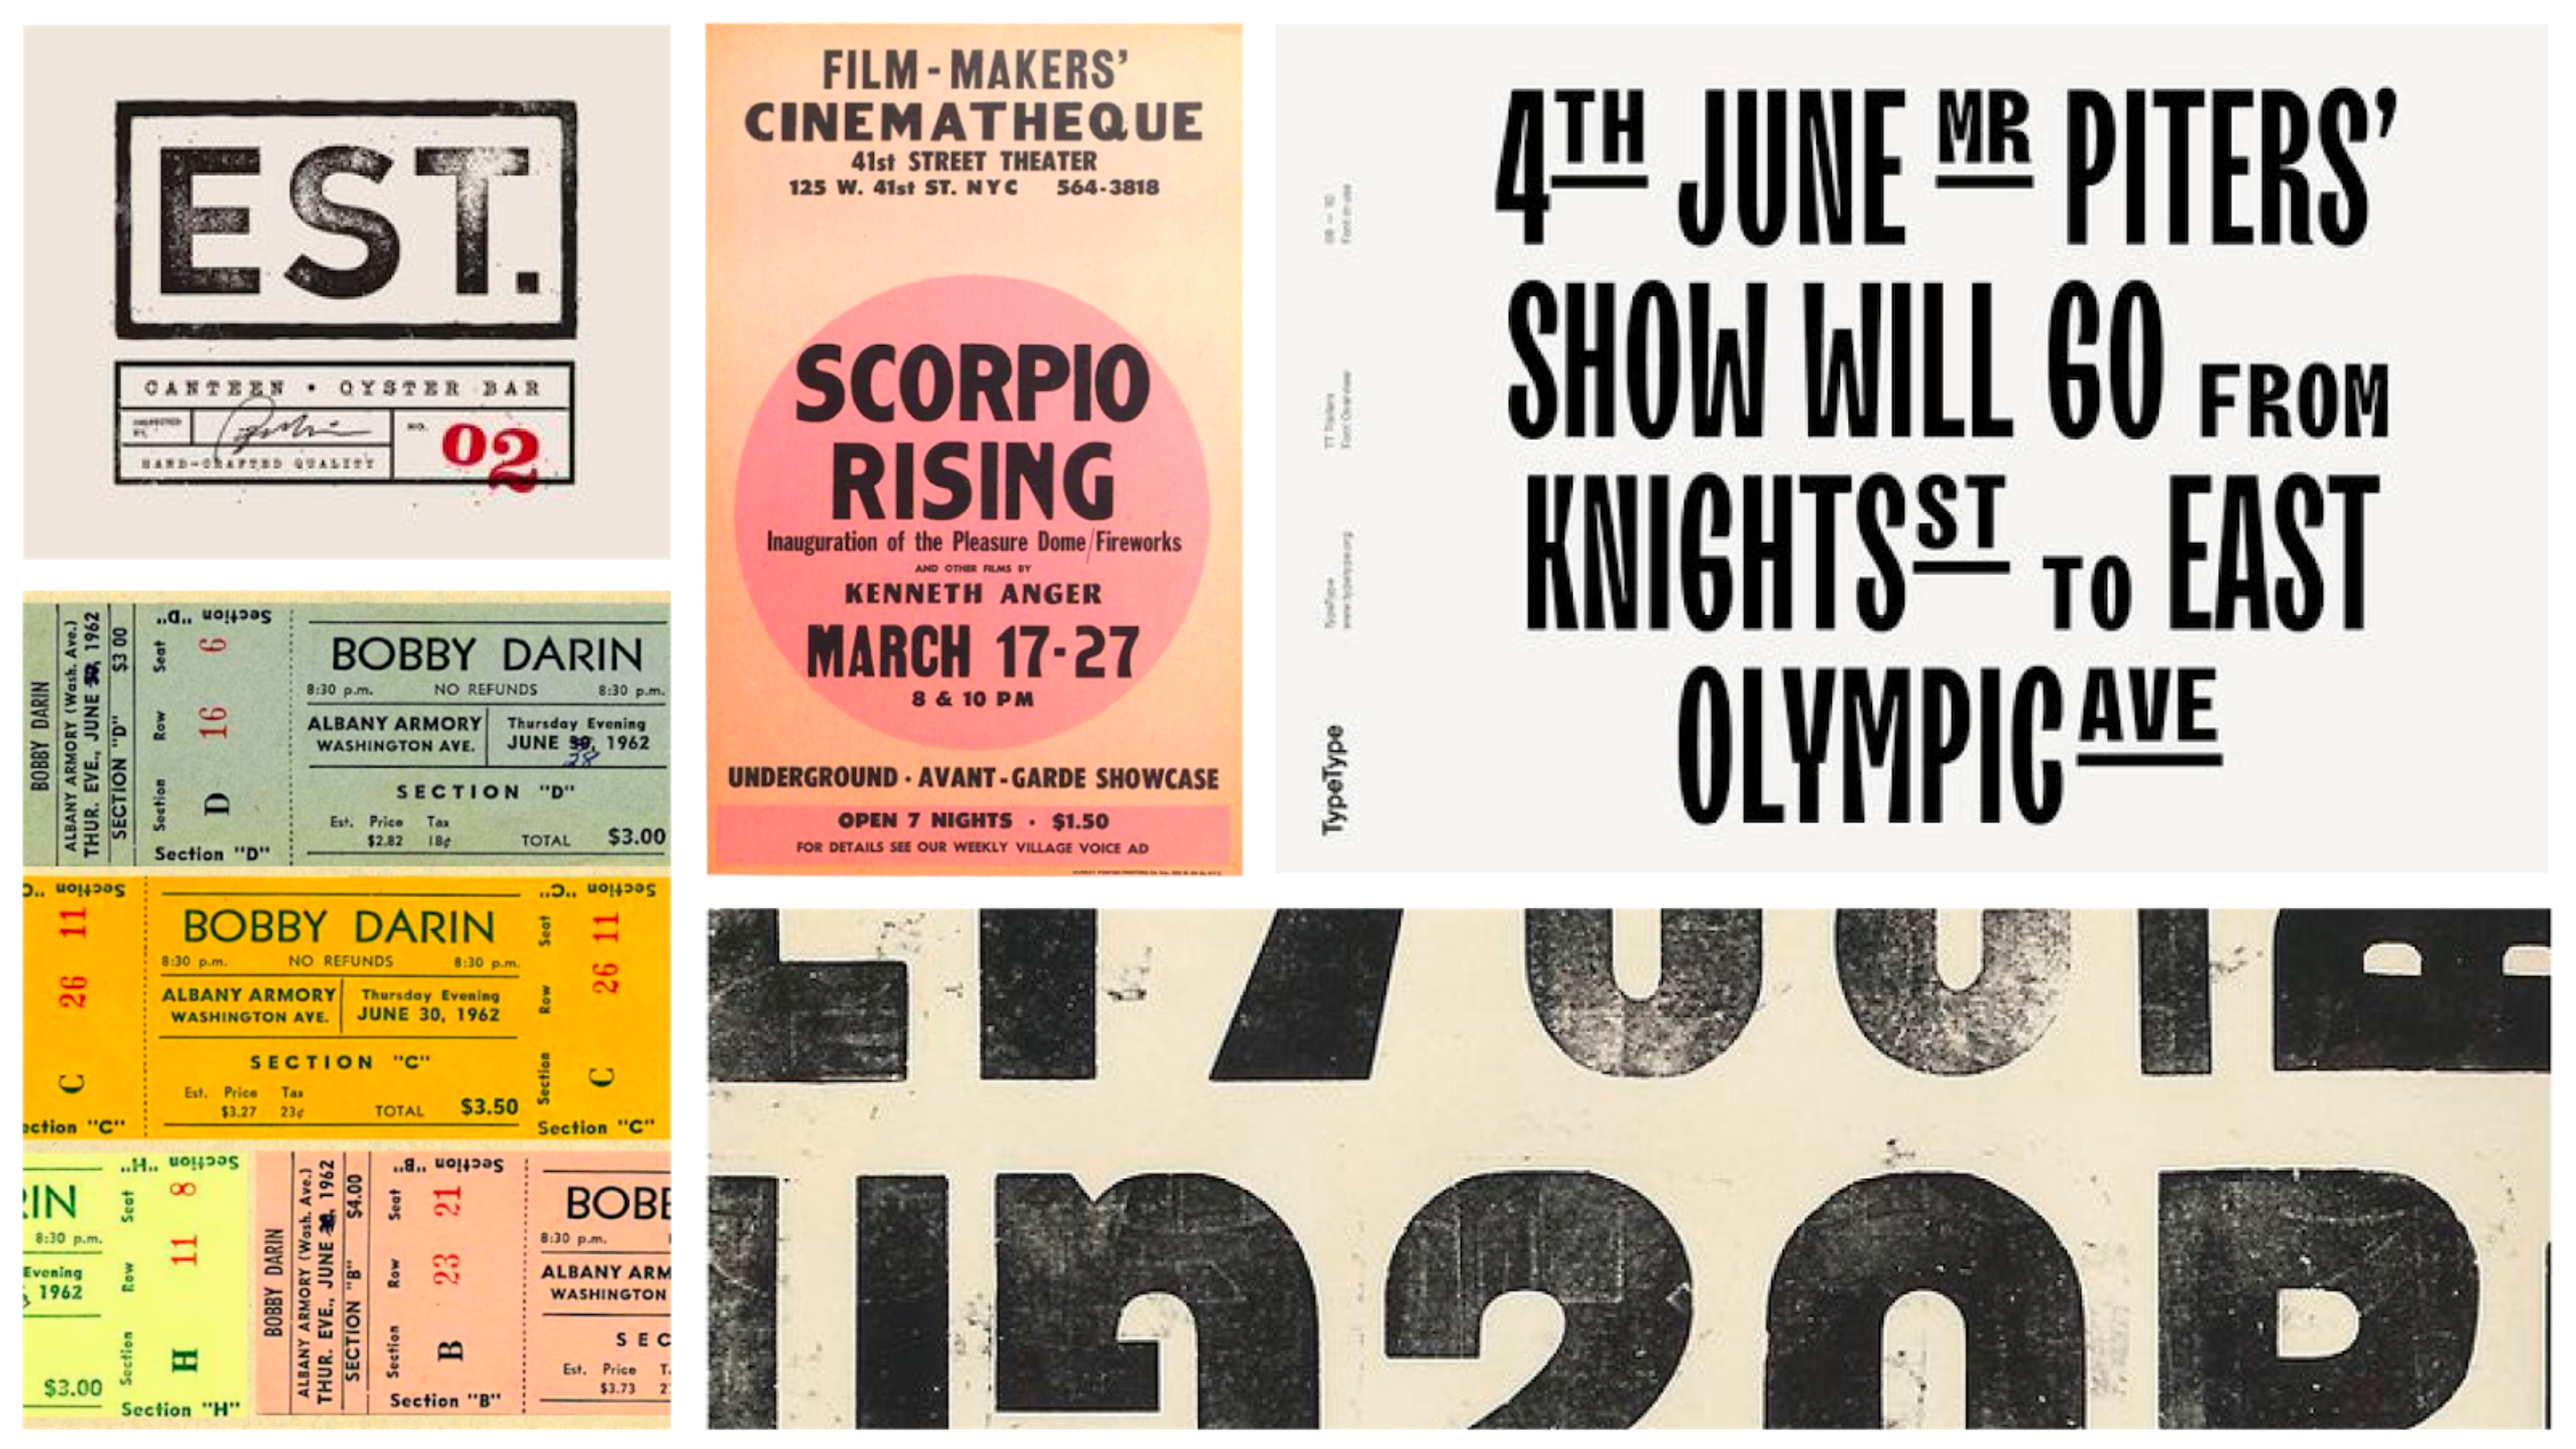 Inspirational mood board typography for artist Ben Sollee's brand identity.